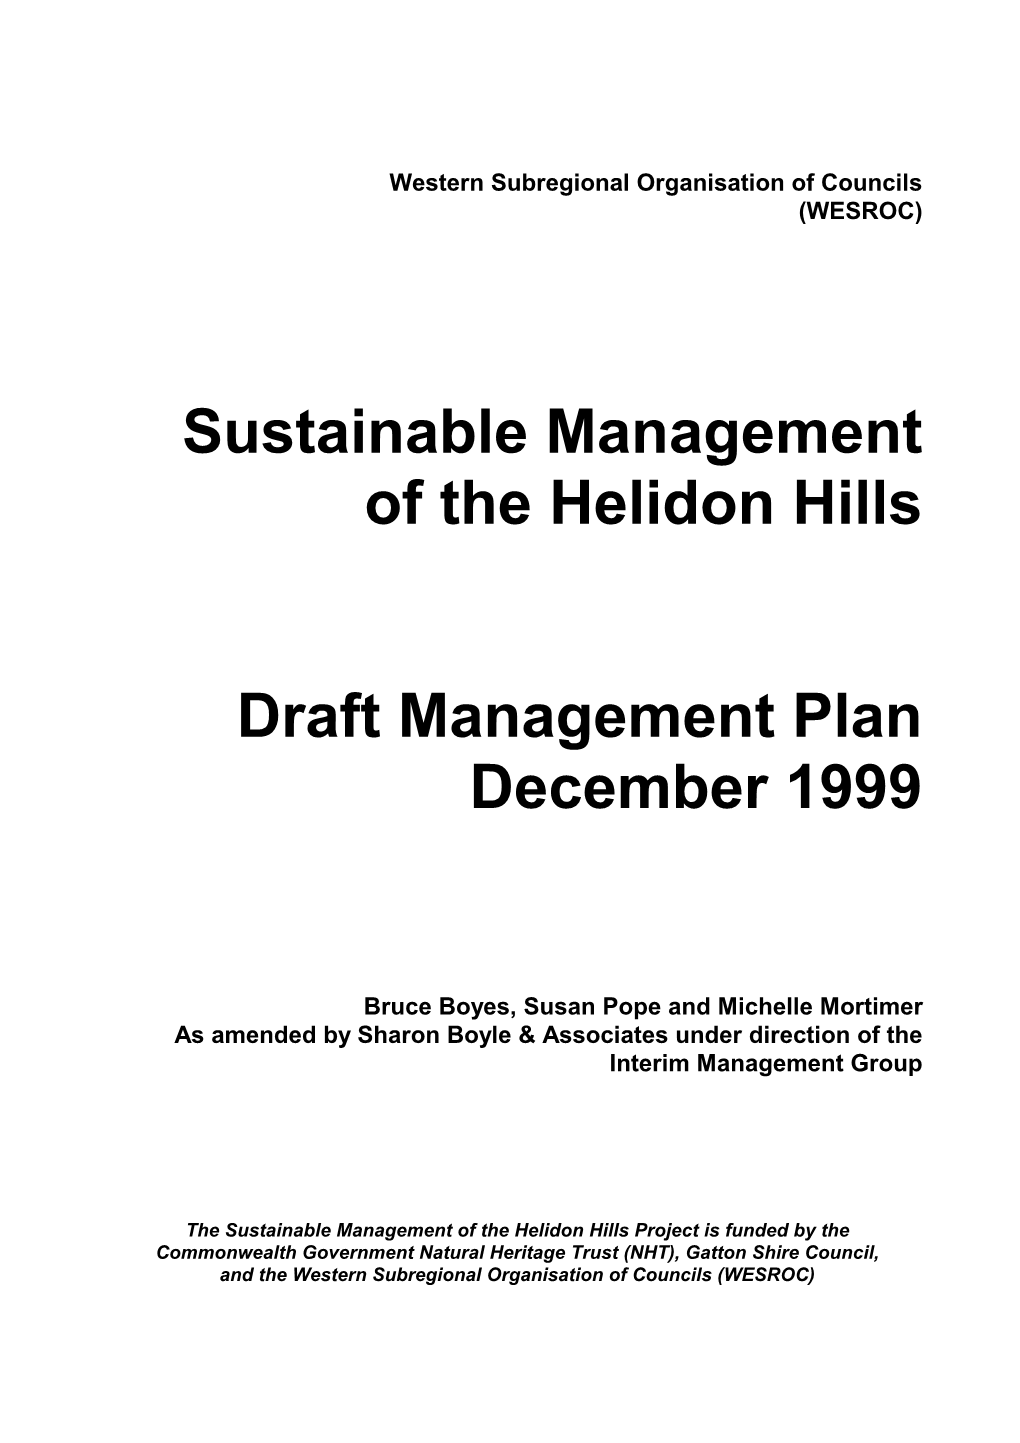 Sustainable Management of the Helidon Hills Draft Management Plan